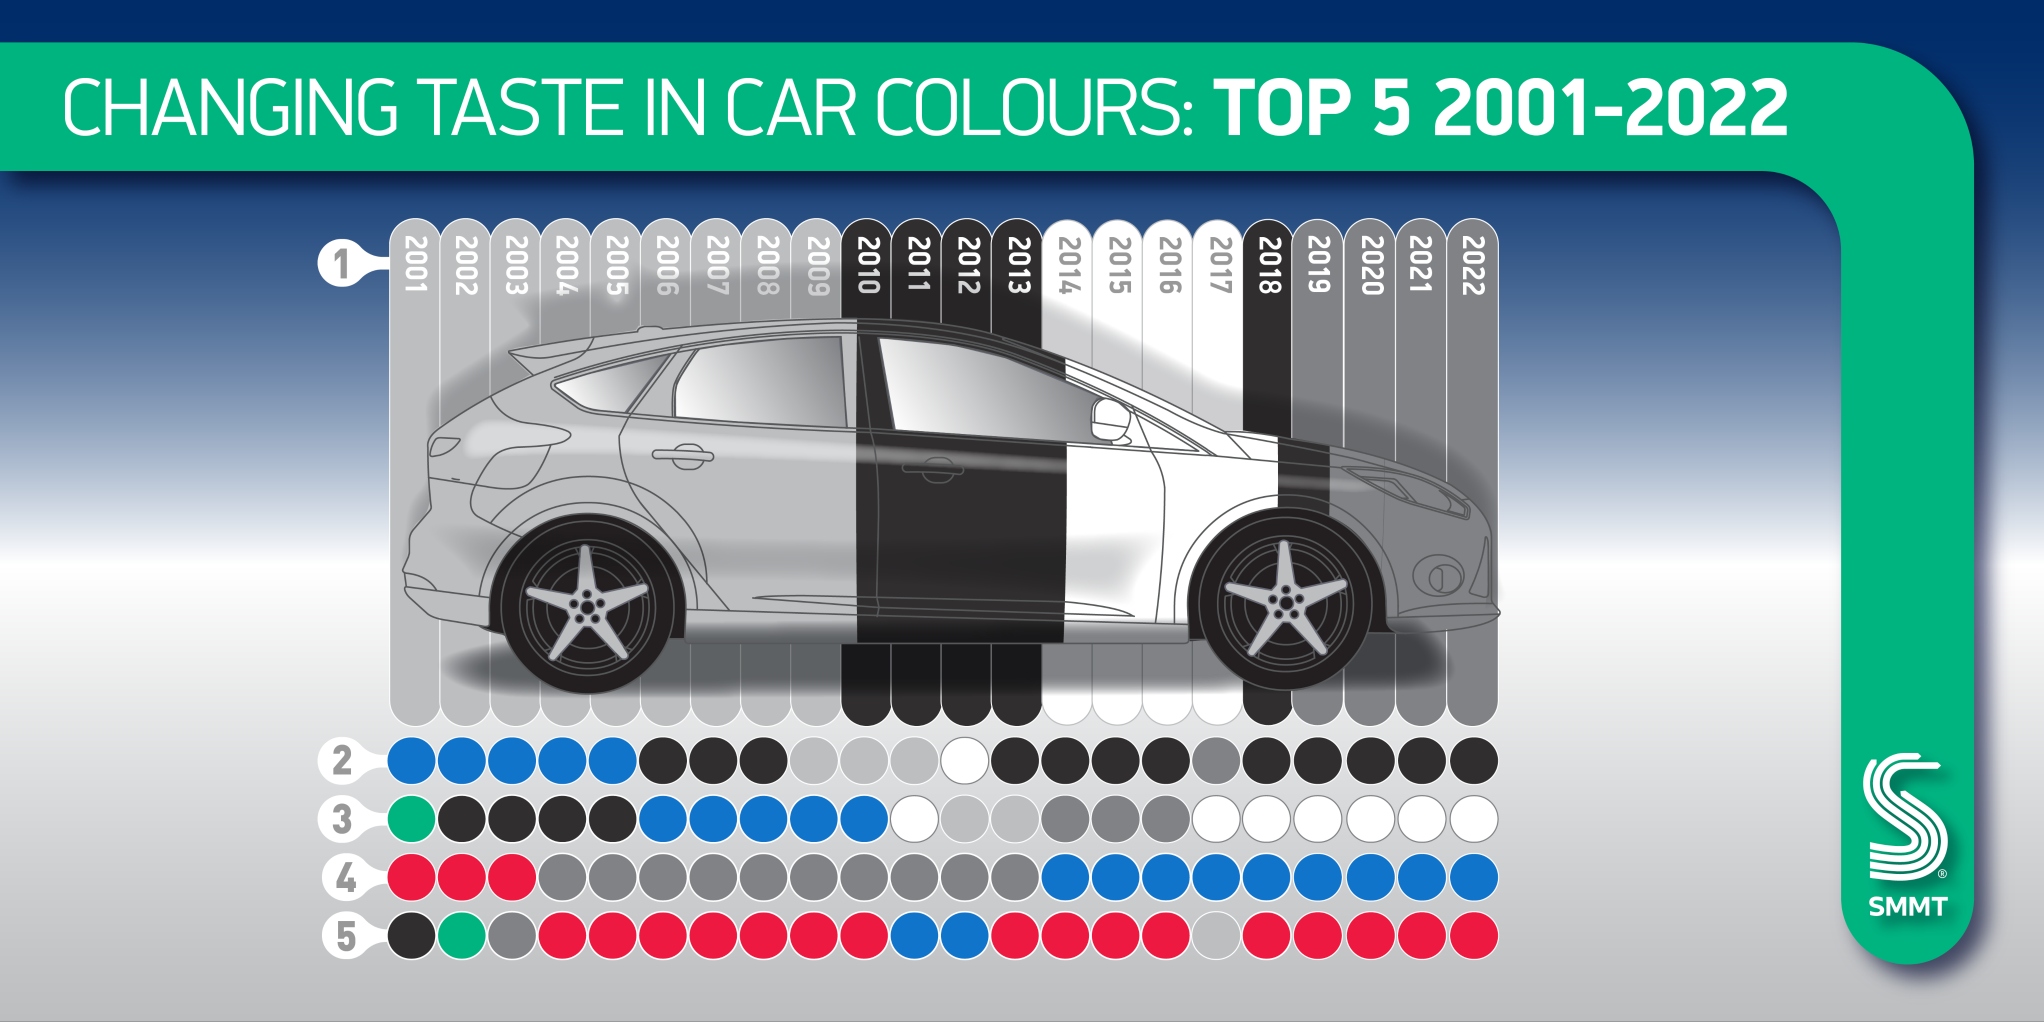 Colours put in the shade as grey matters most to 25%+ of UK car buyers